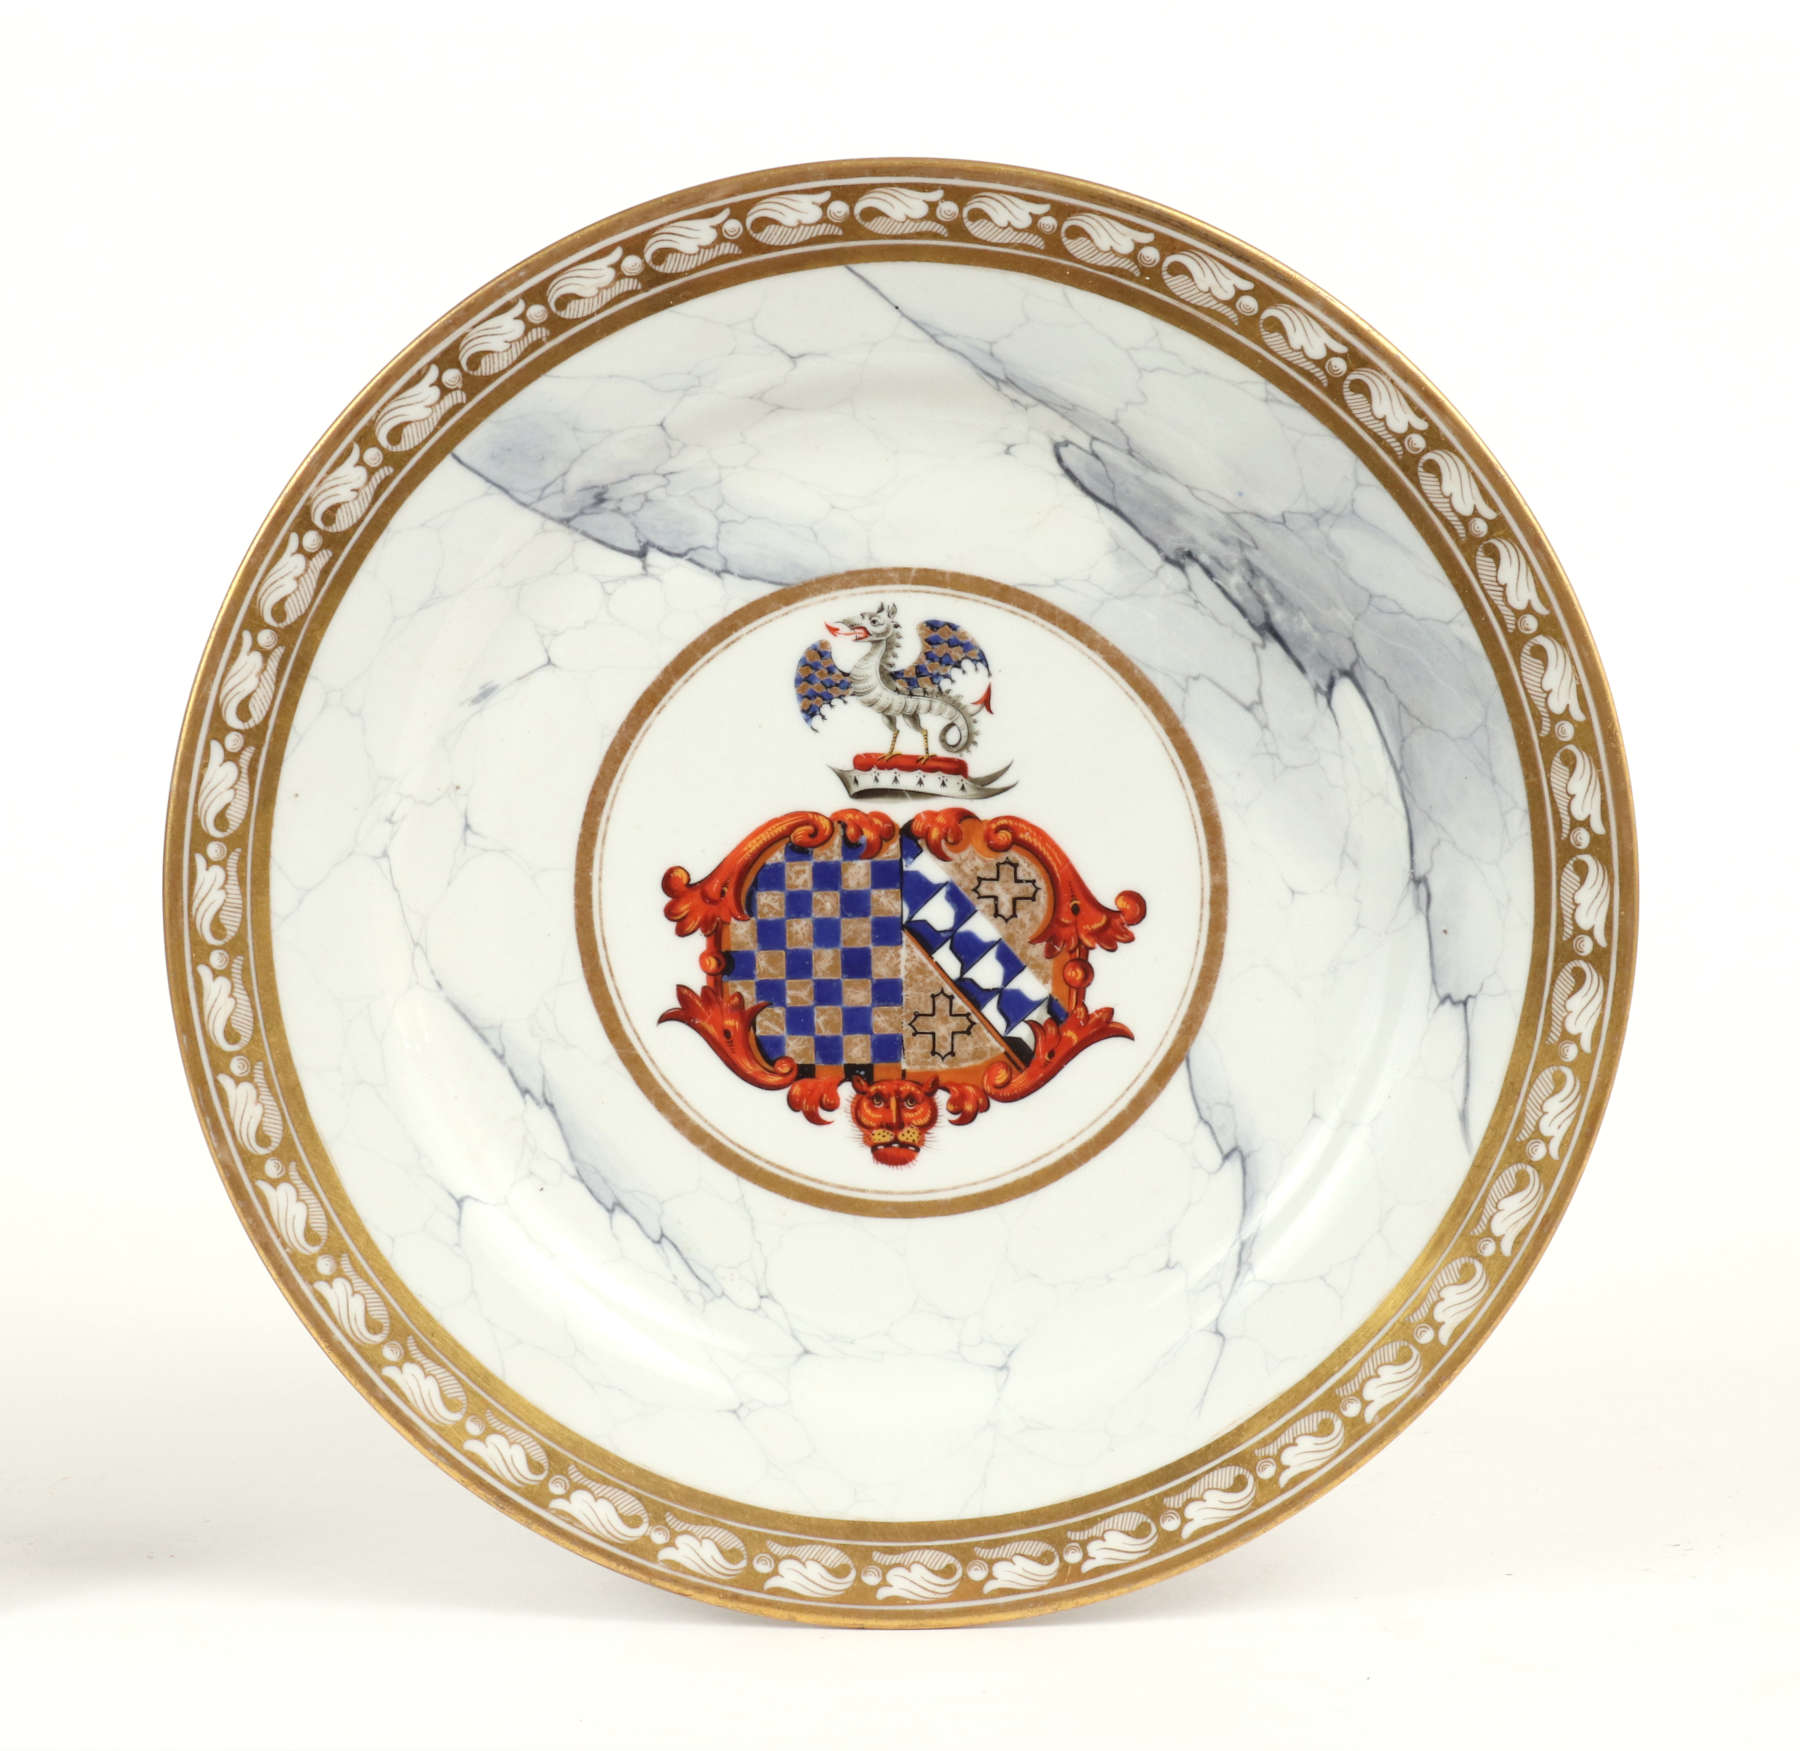 Pair of Barr, Flight & Barr Worcester Armorial Plates, c. 1810